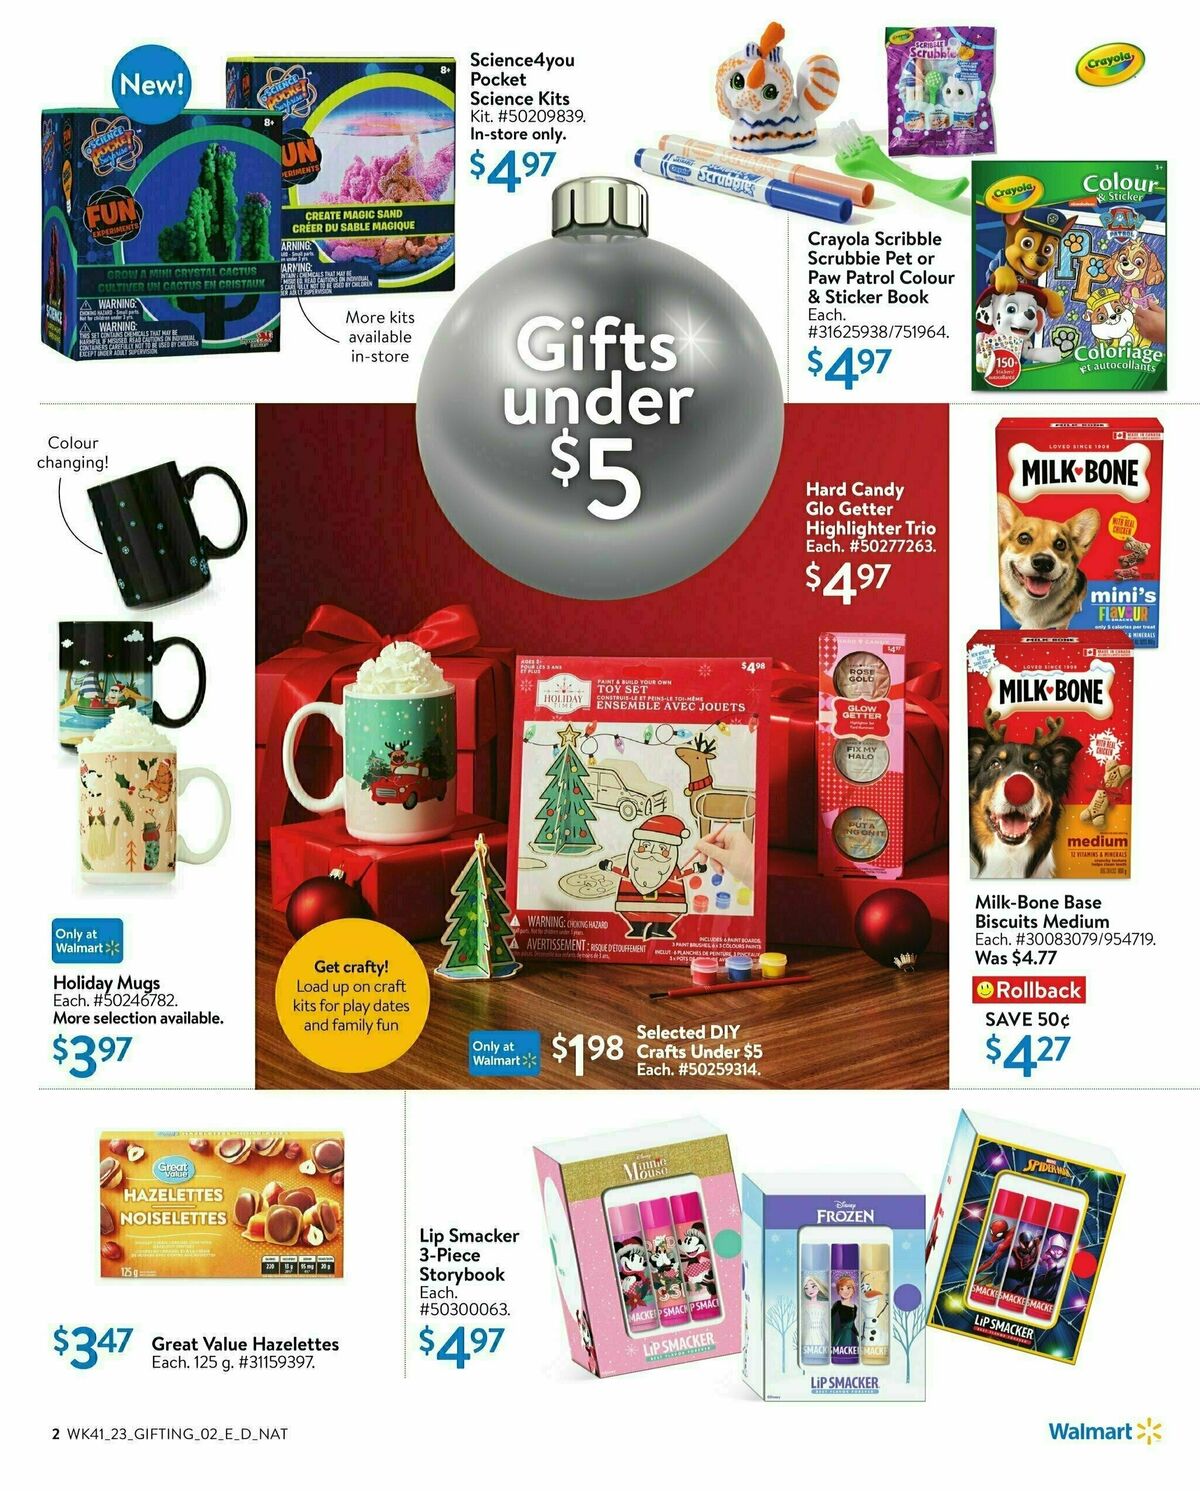 Walmart Gifting Guide Flyer from November 2